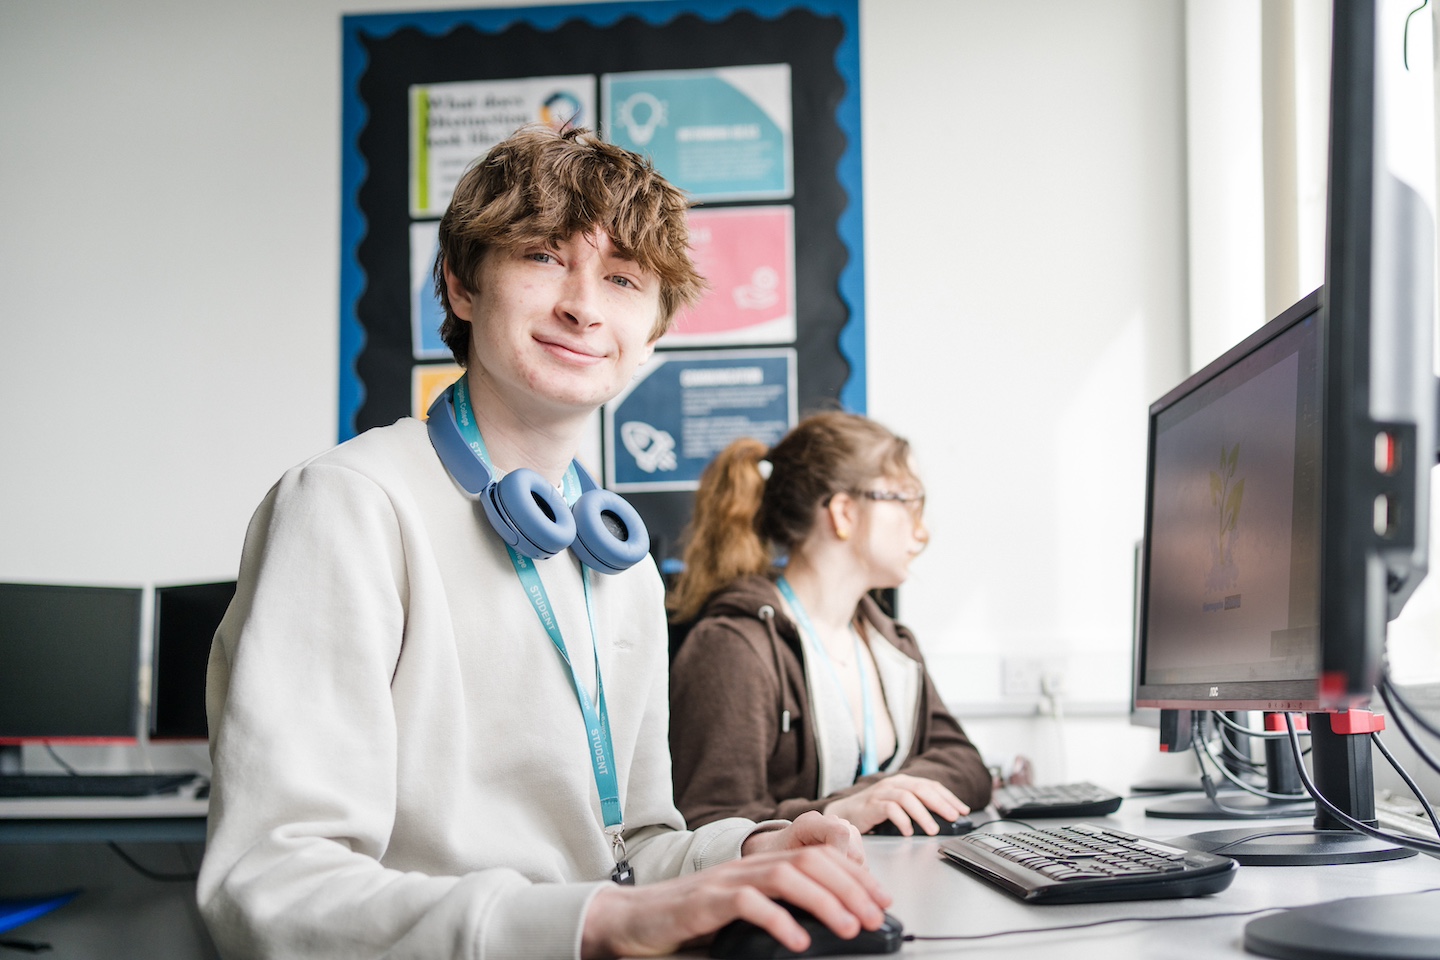 Student wearing blue lanyard with headphone sitting in front of computer smiling